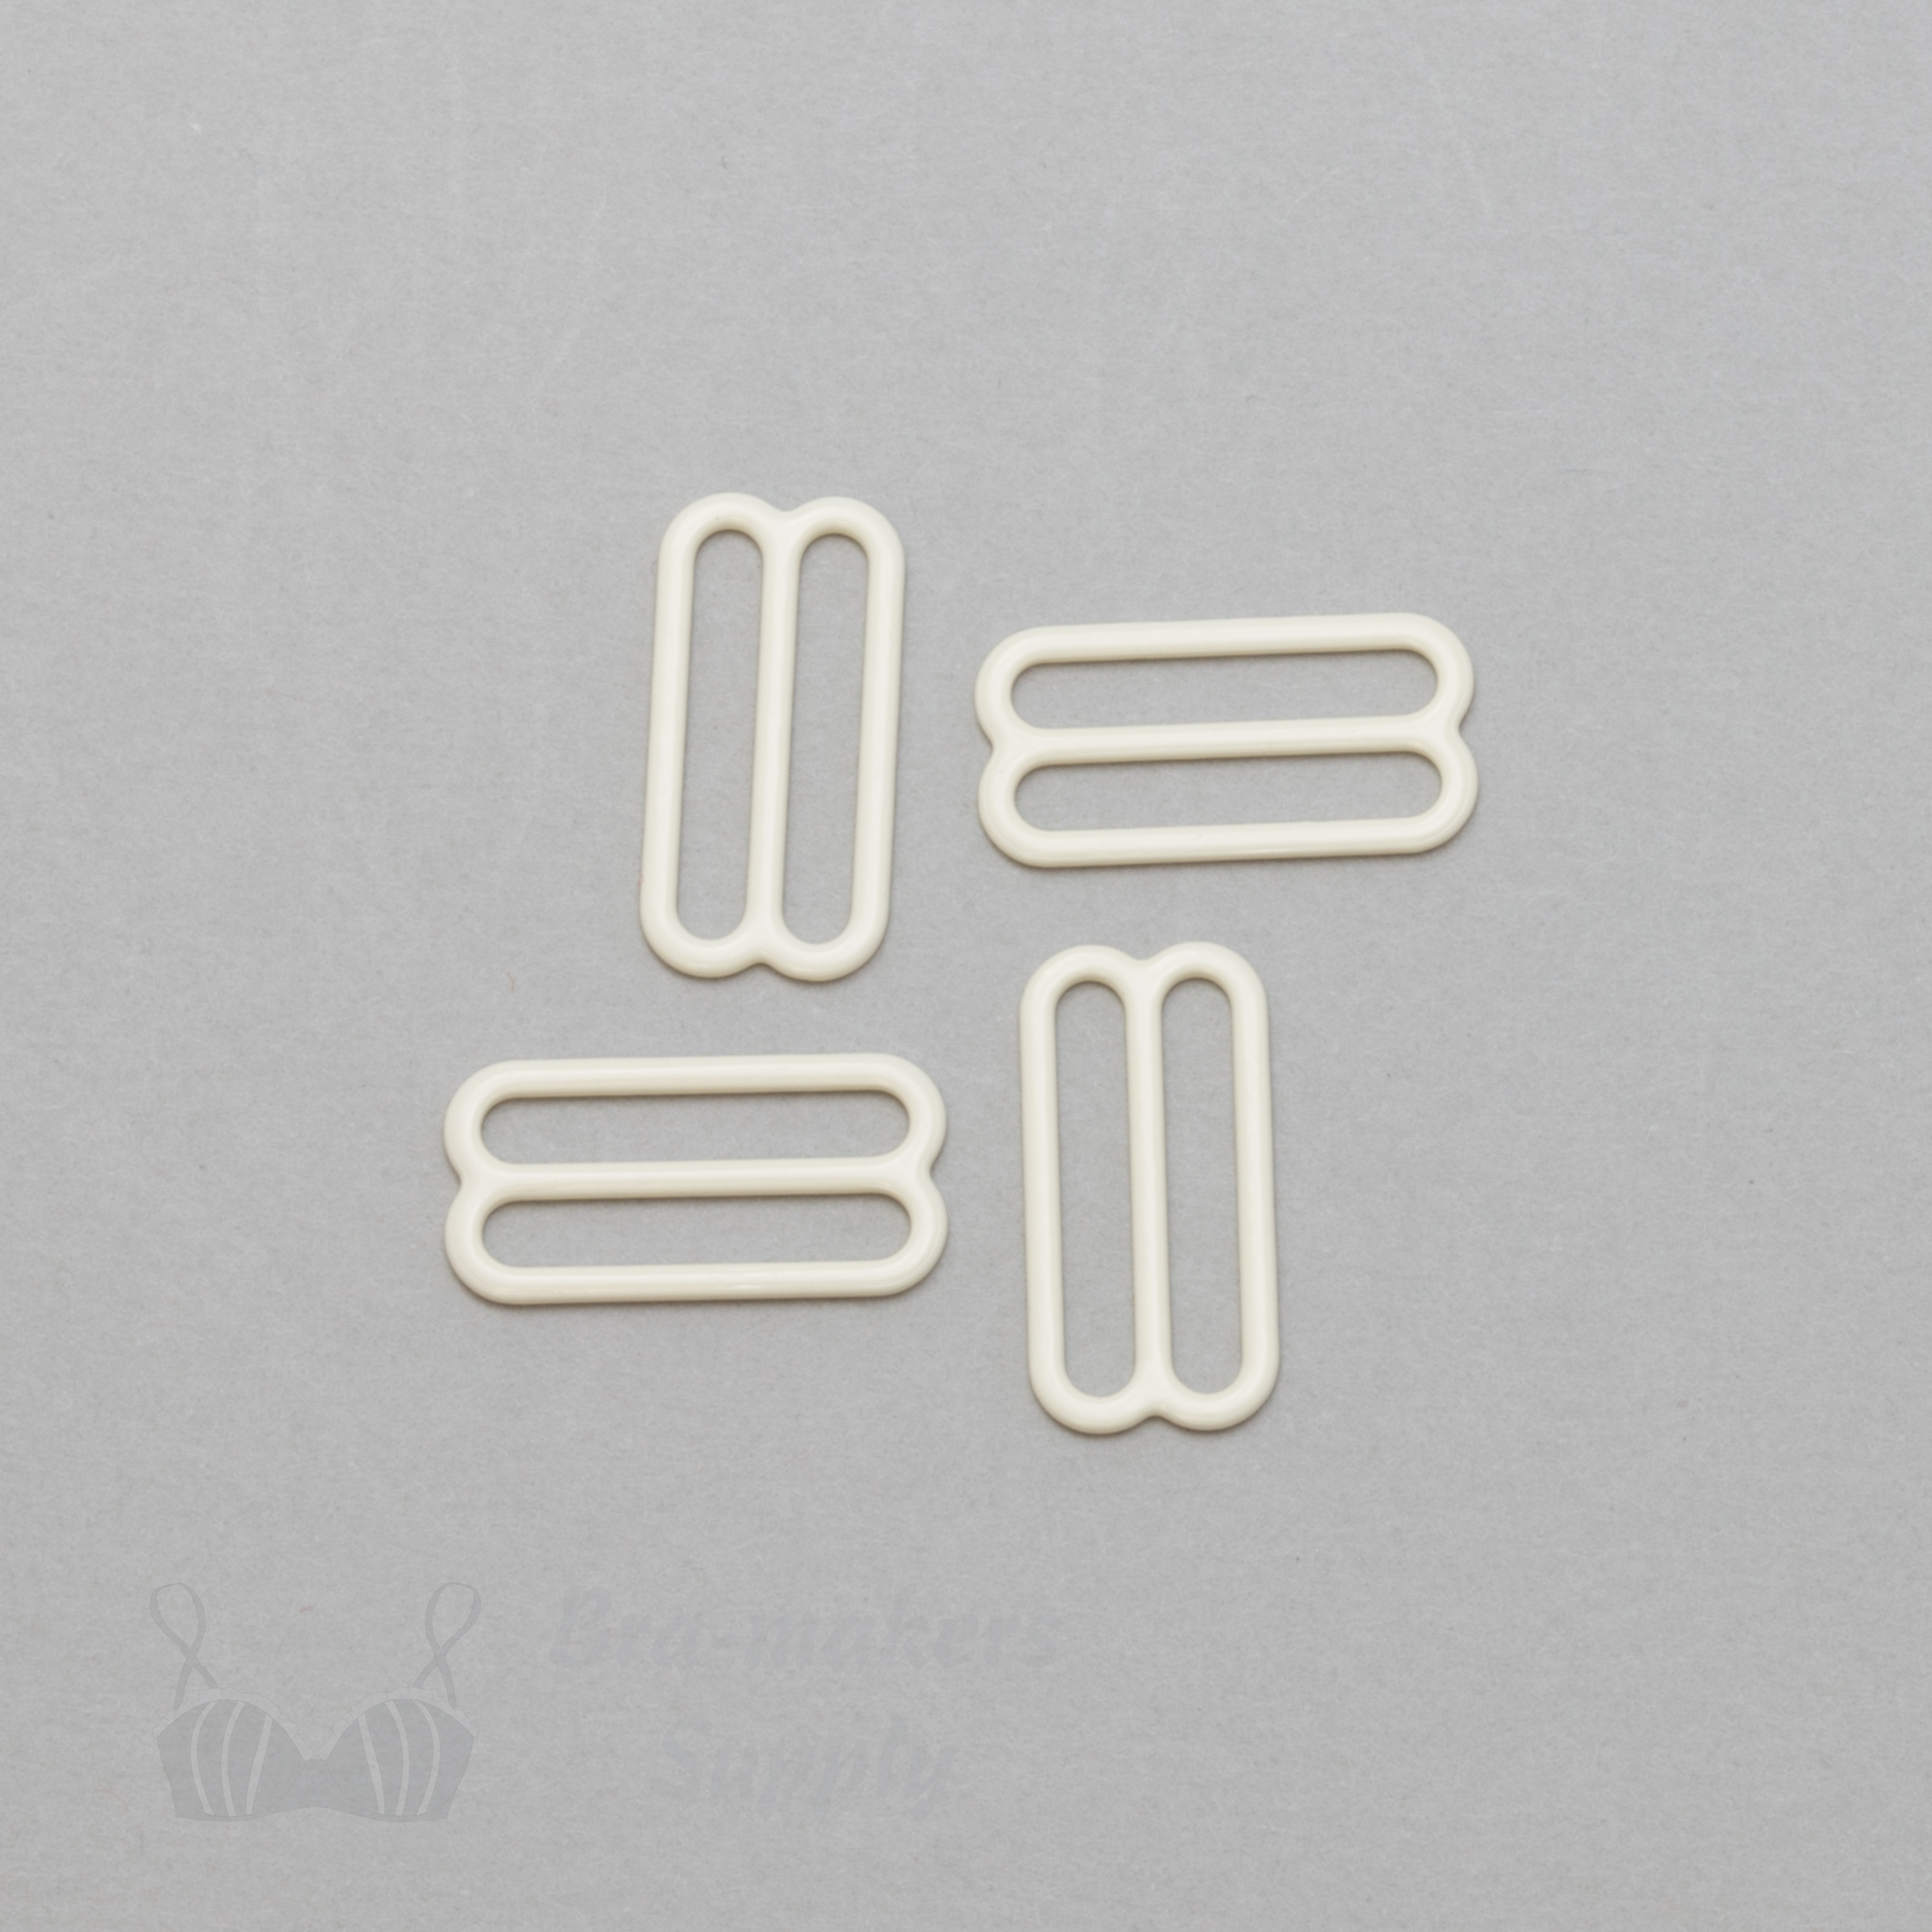 three quarters inch 19mm RM-60 S PK4 ivory nylon coated metal rings sliders or winter white Pantone 11-0507 from Bra-Makers Supply 4 sliders shown